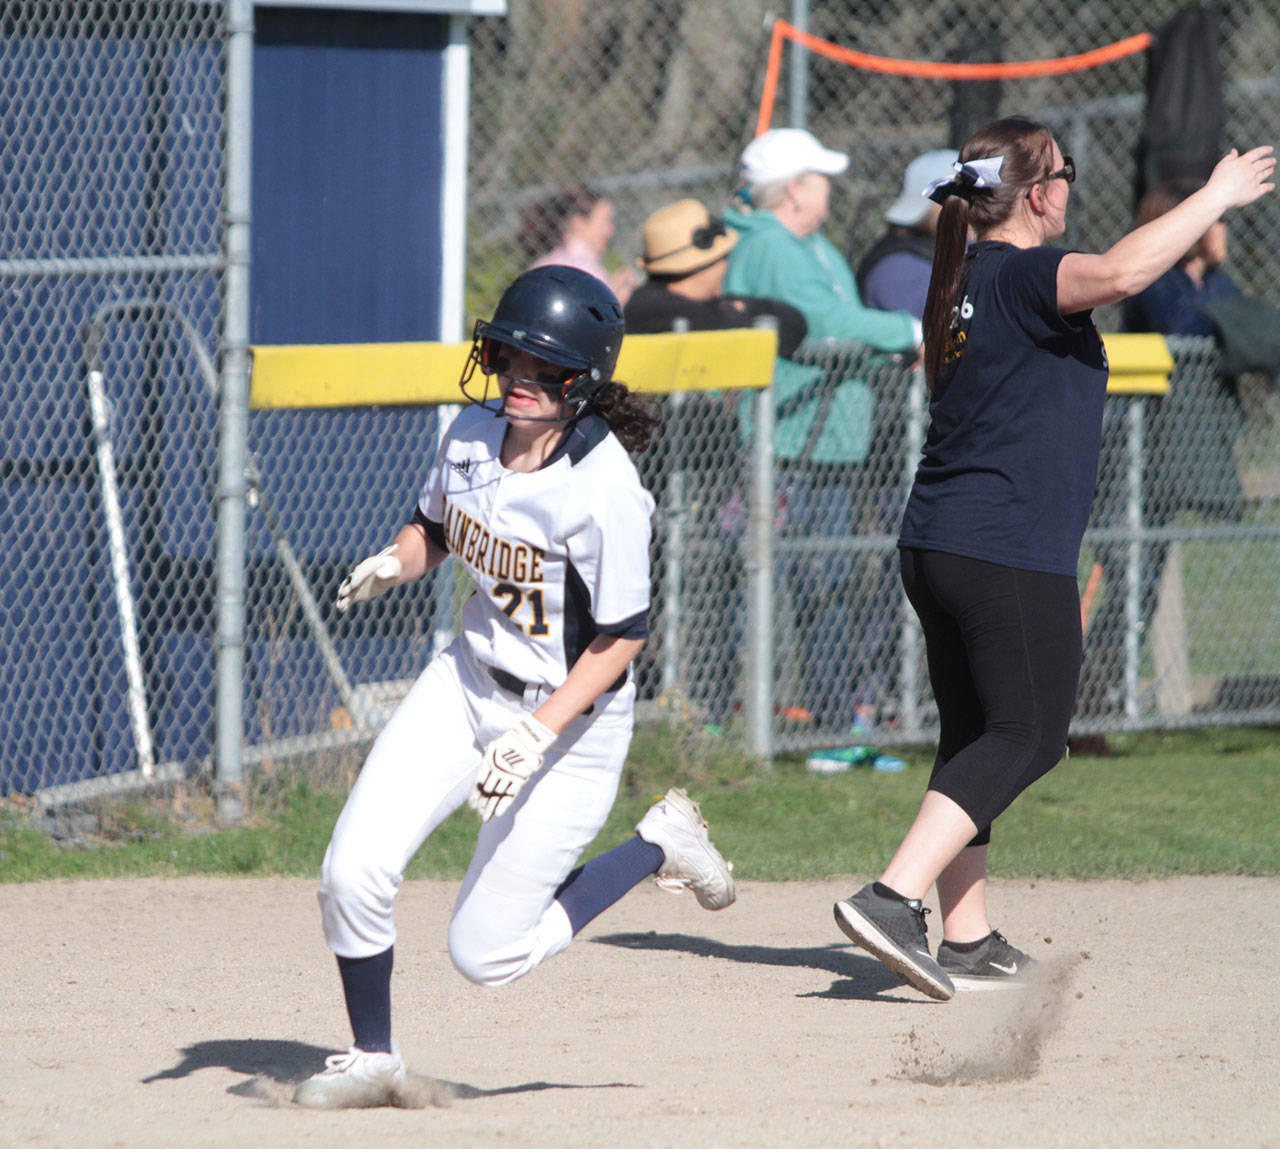 Morgan Lassoff rounds third on her way home for Bainbridge’s first score of the game against Gig Harbor. (Brian Kelly | Bainbridge Island Review)